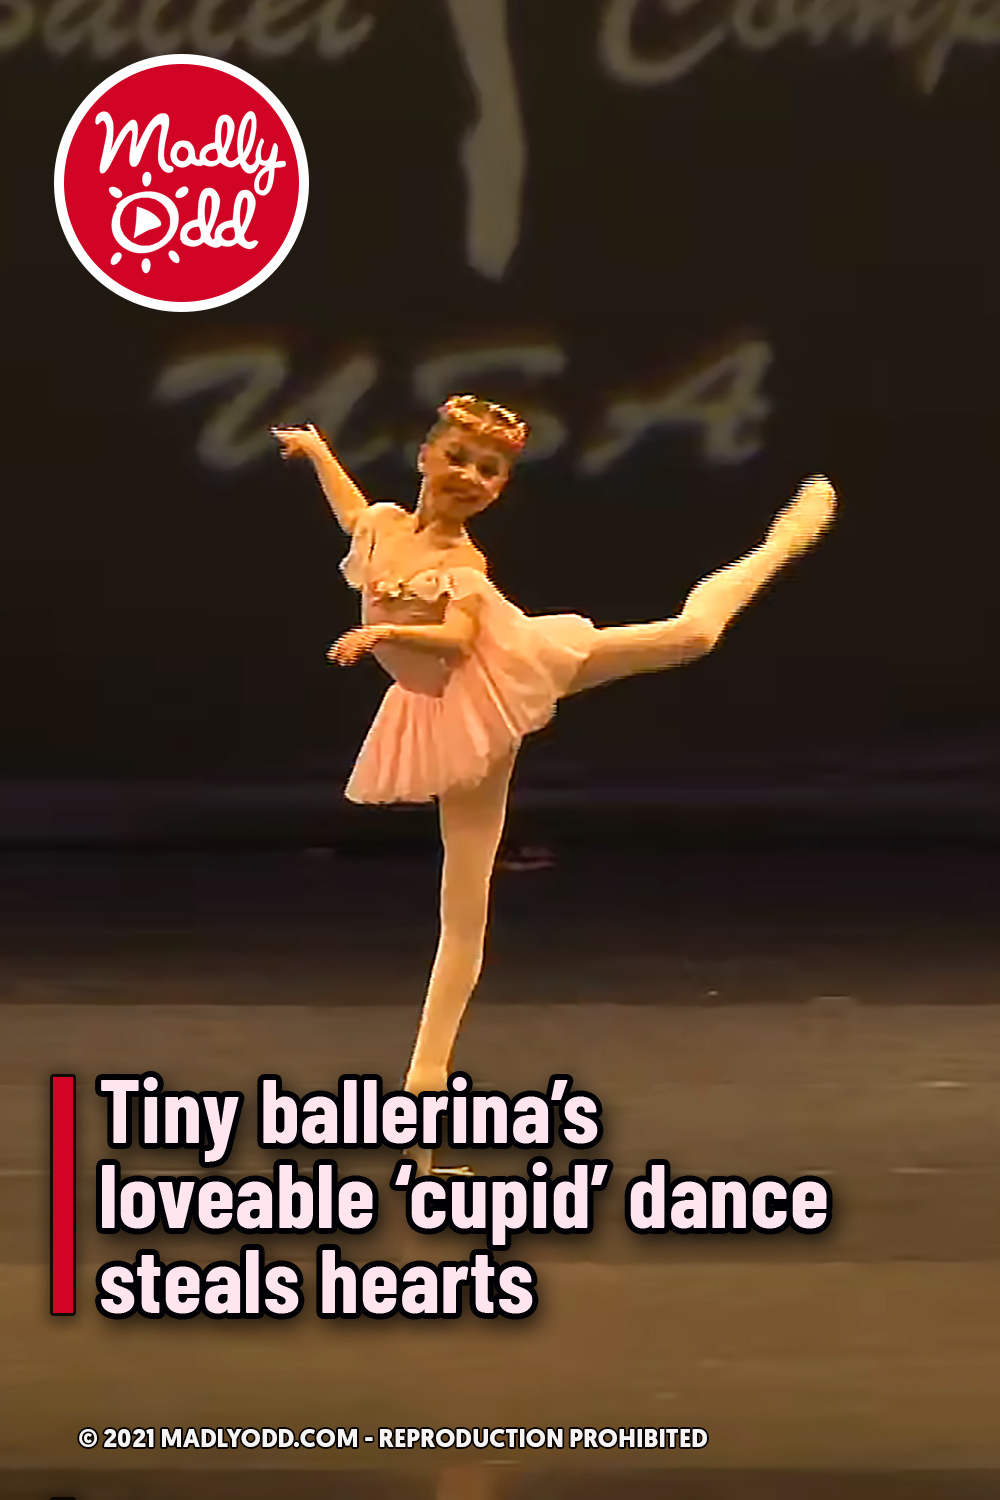 Tiny ballerina’s loveable ‘cupid’ dance steals hearts